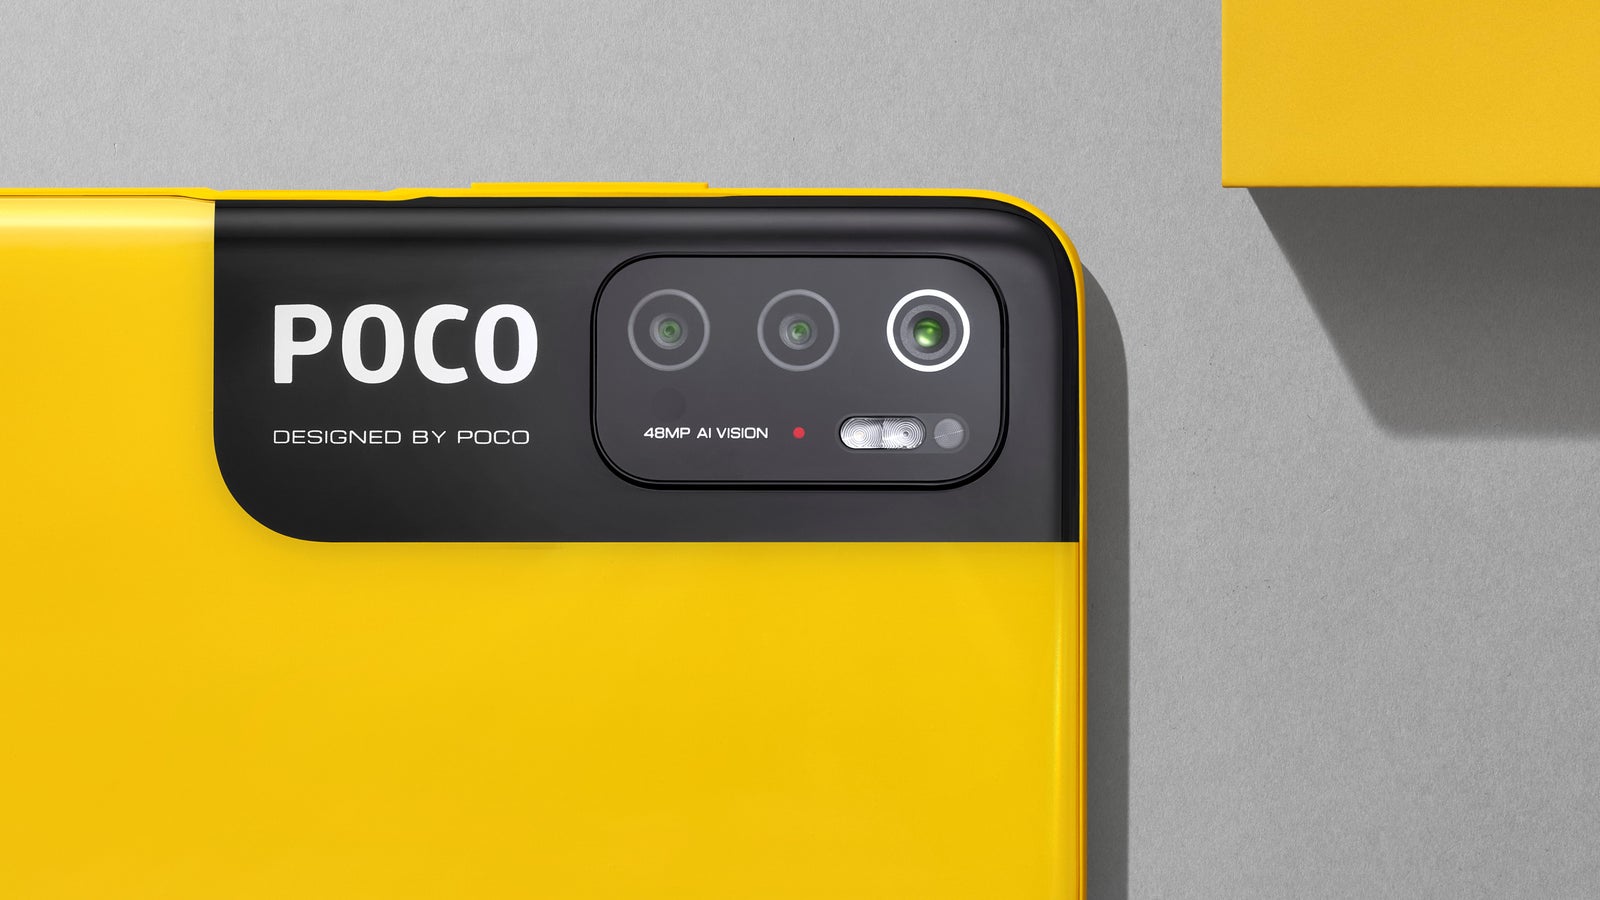 The Poco M3 Pro 5g Is Official With The Dimensity 700 And A 90hz Display Phonearena 6115